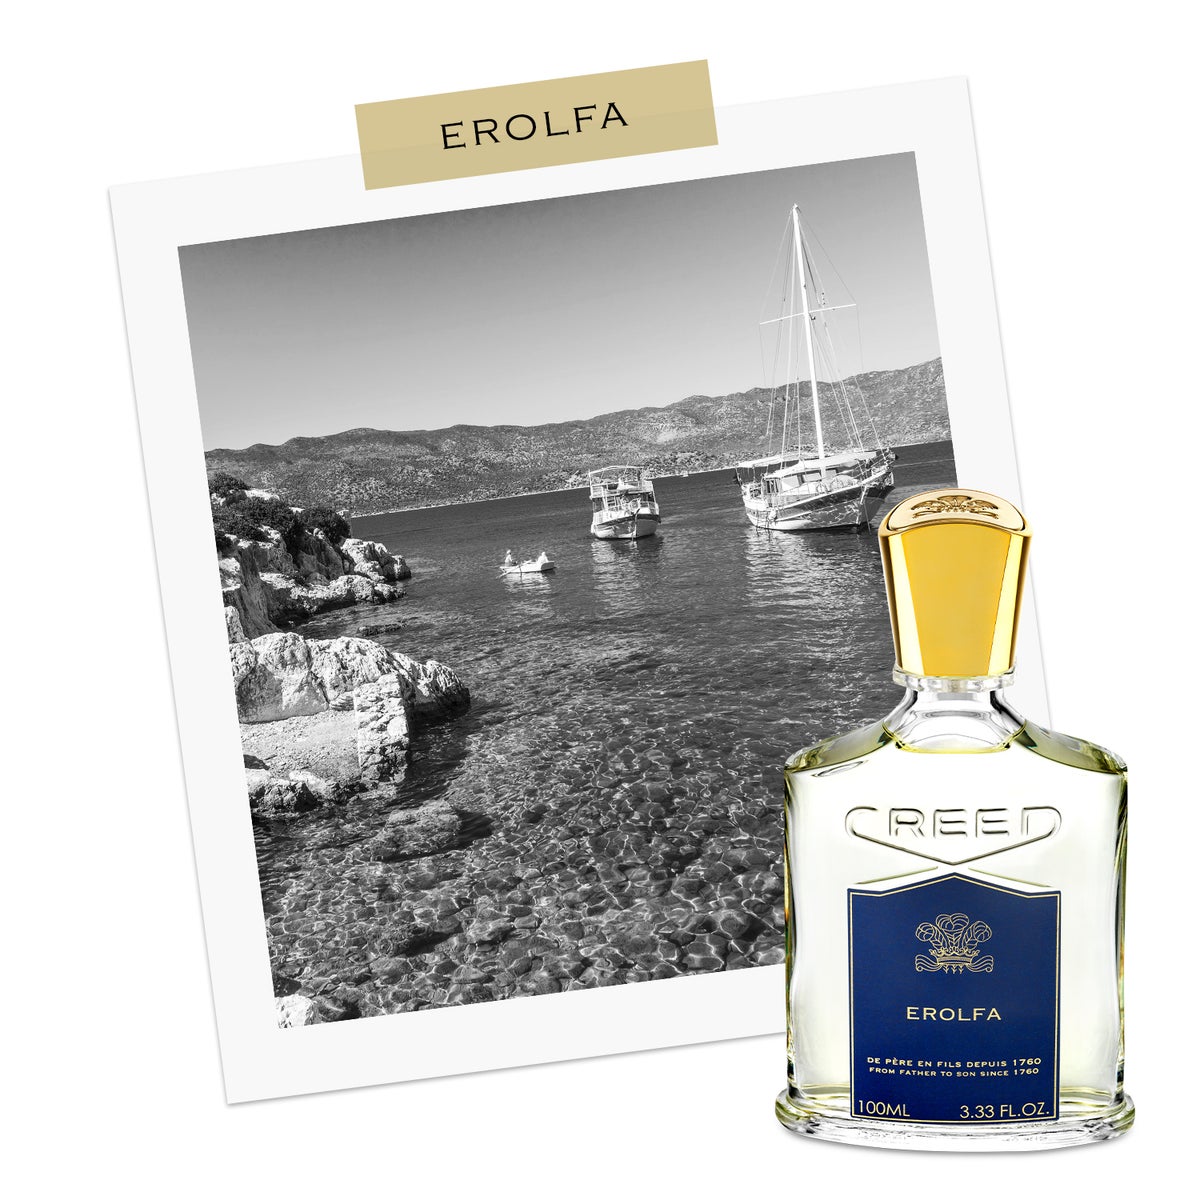 Erolfa bottle infront of black & white postcard of boats in the sea